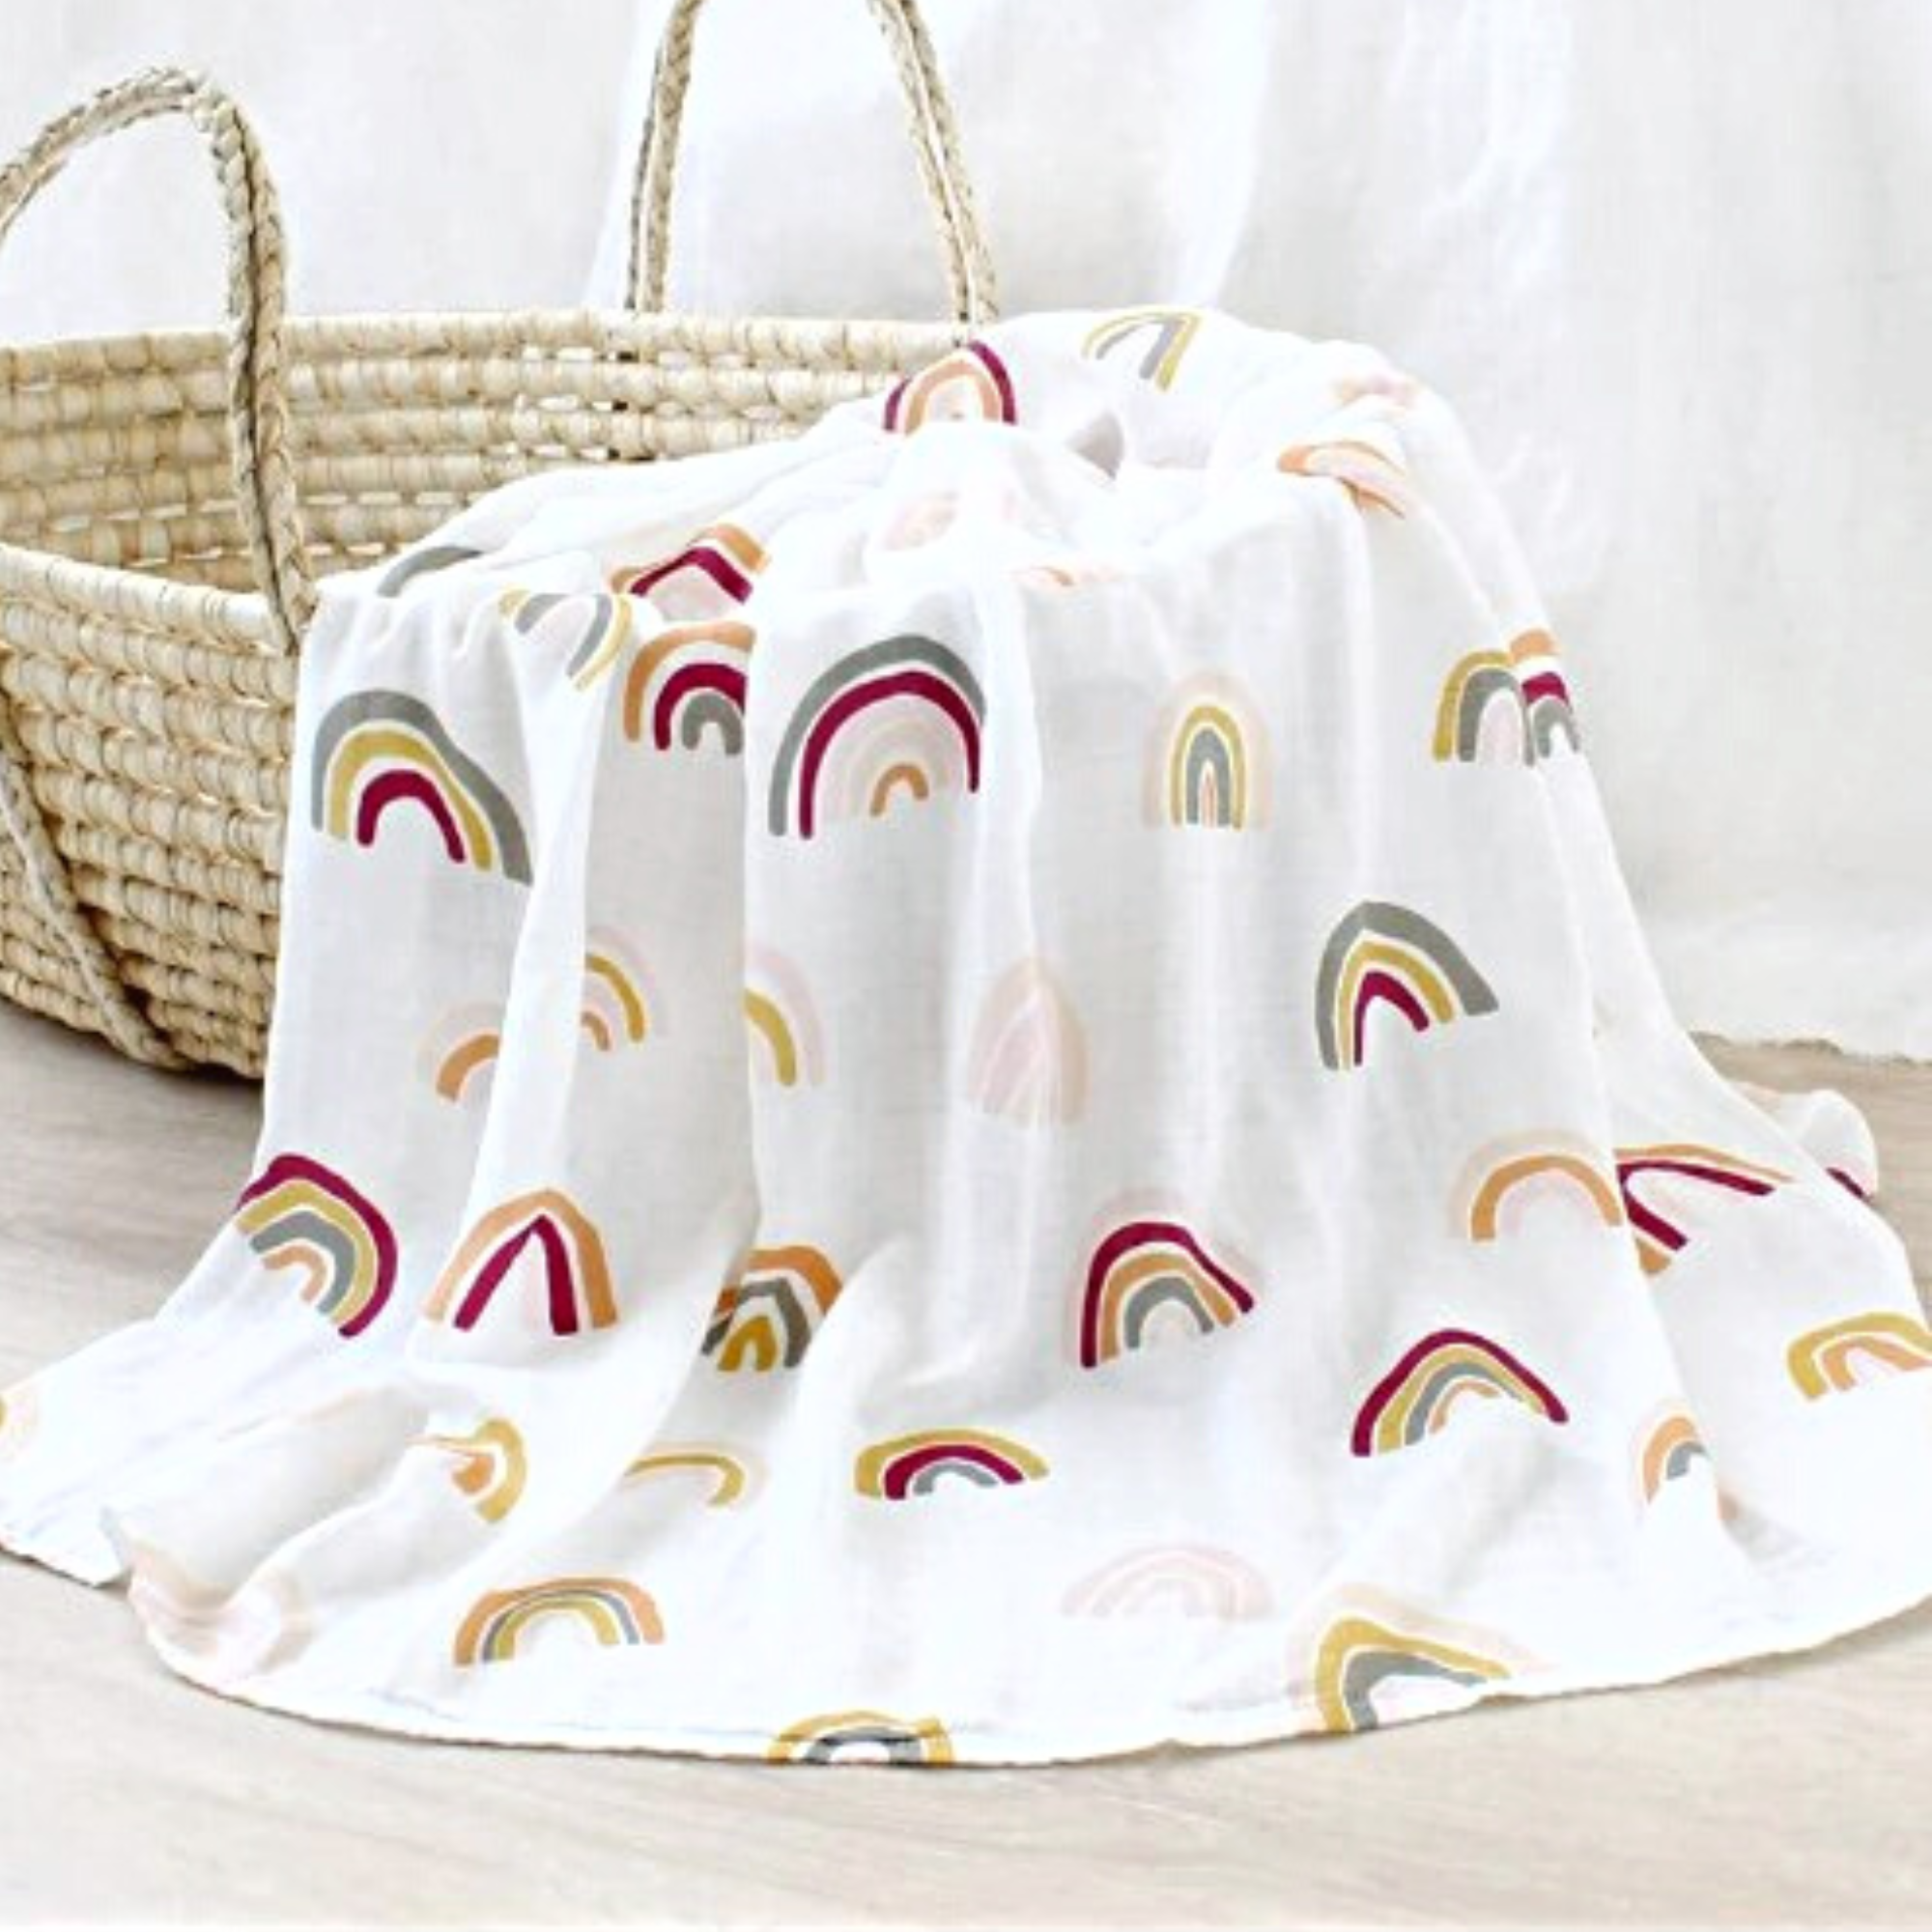 Muslin swaddle wraps / bassinet sheets (twin pack)